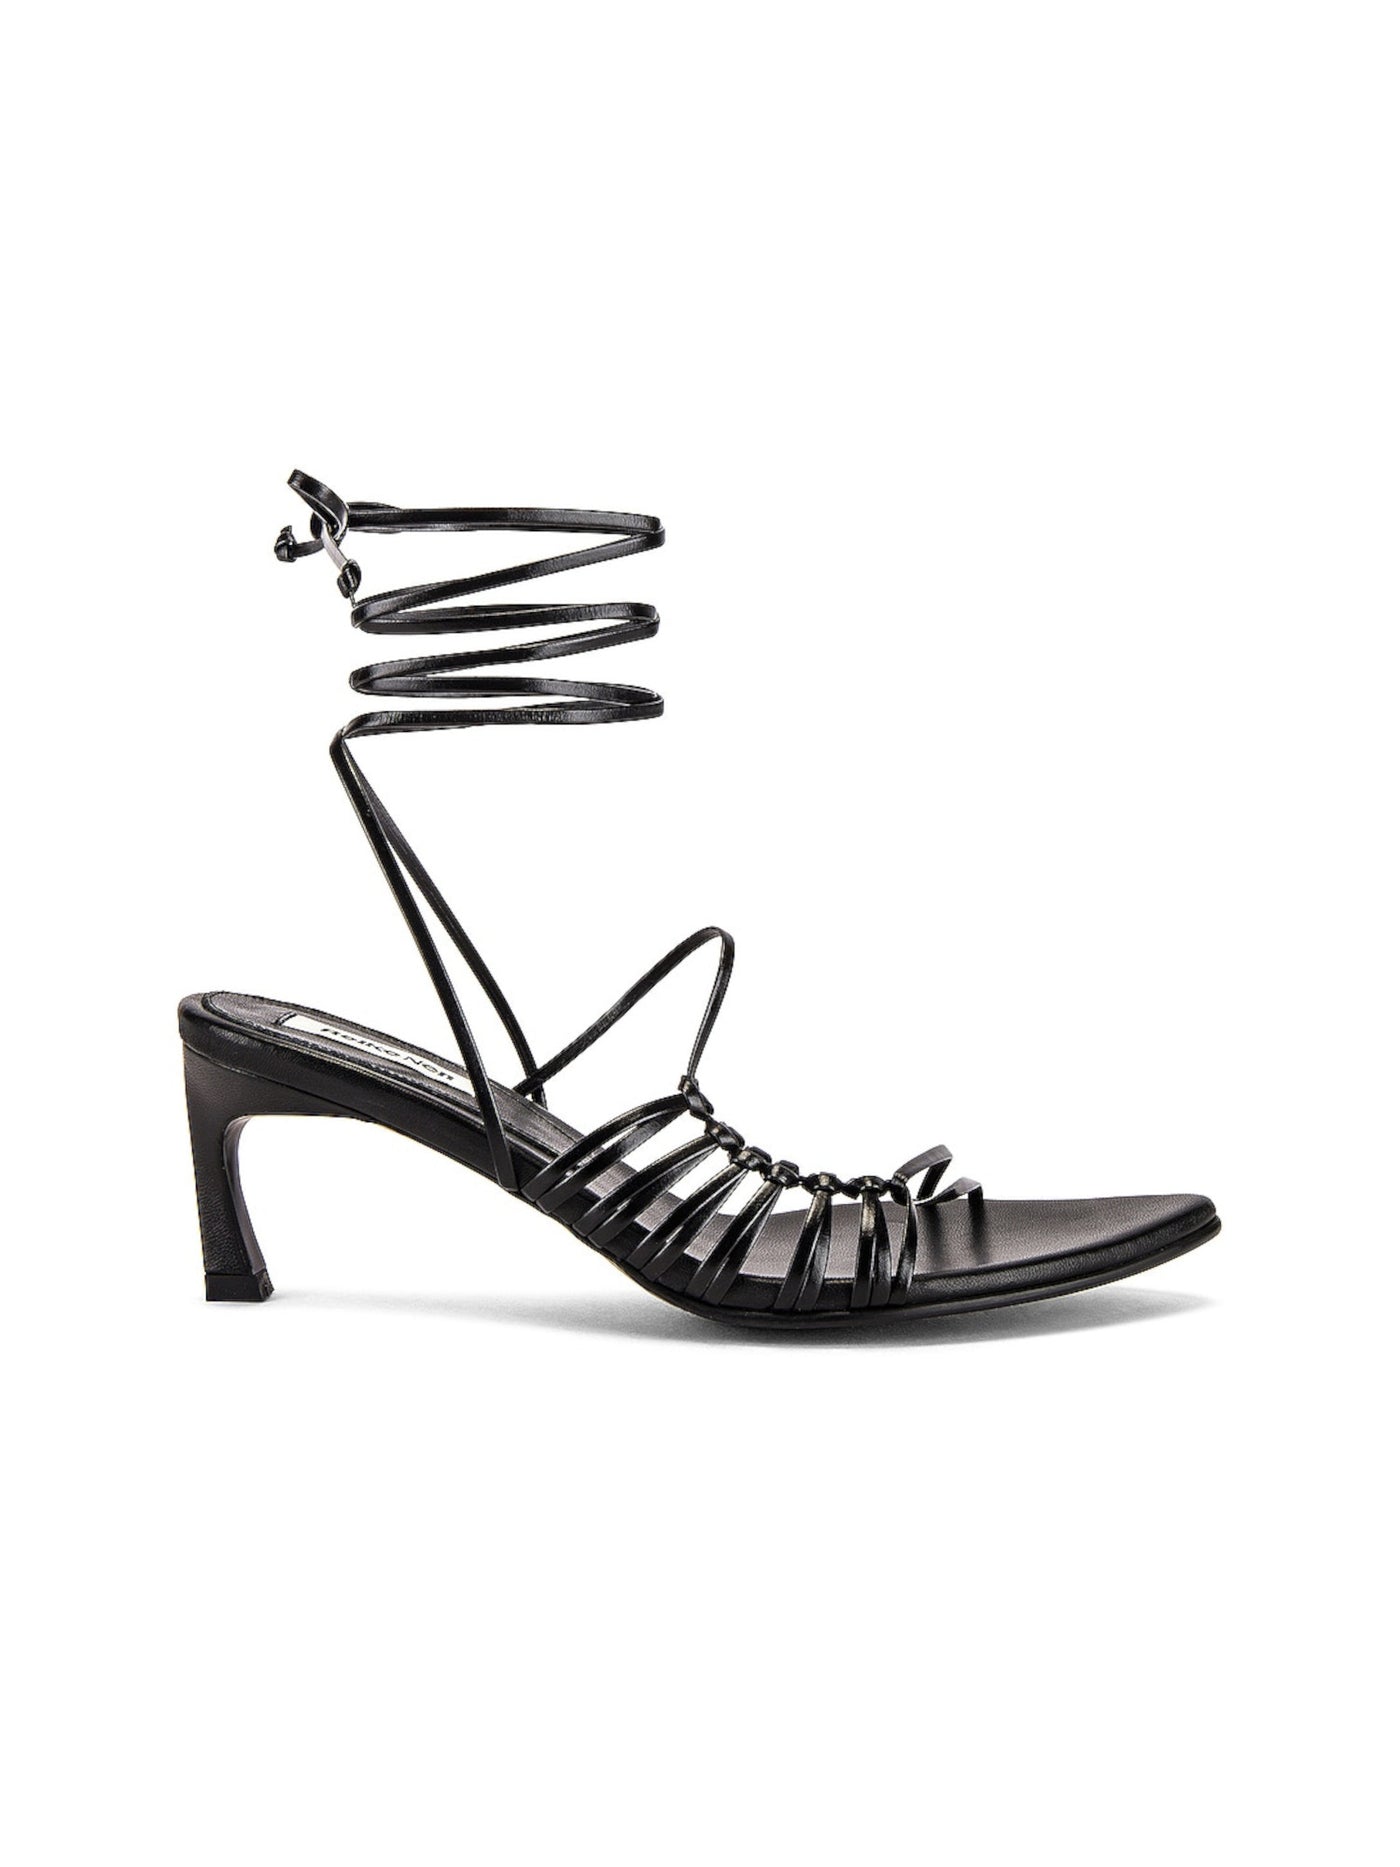 REIKE NEN Womens Black Knotted Padded Strappy Pointed Toe Lace-Up Leather Dress Sandals Shoes 36